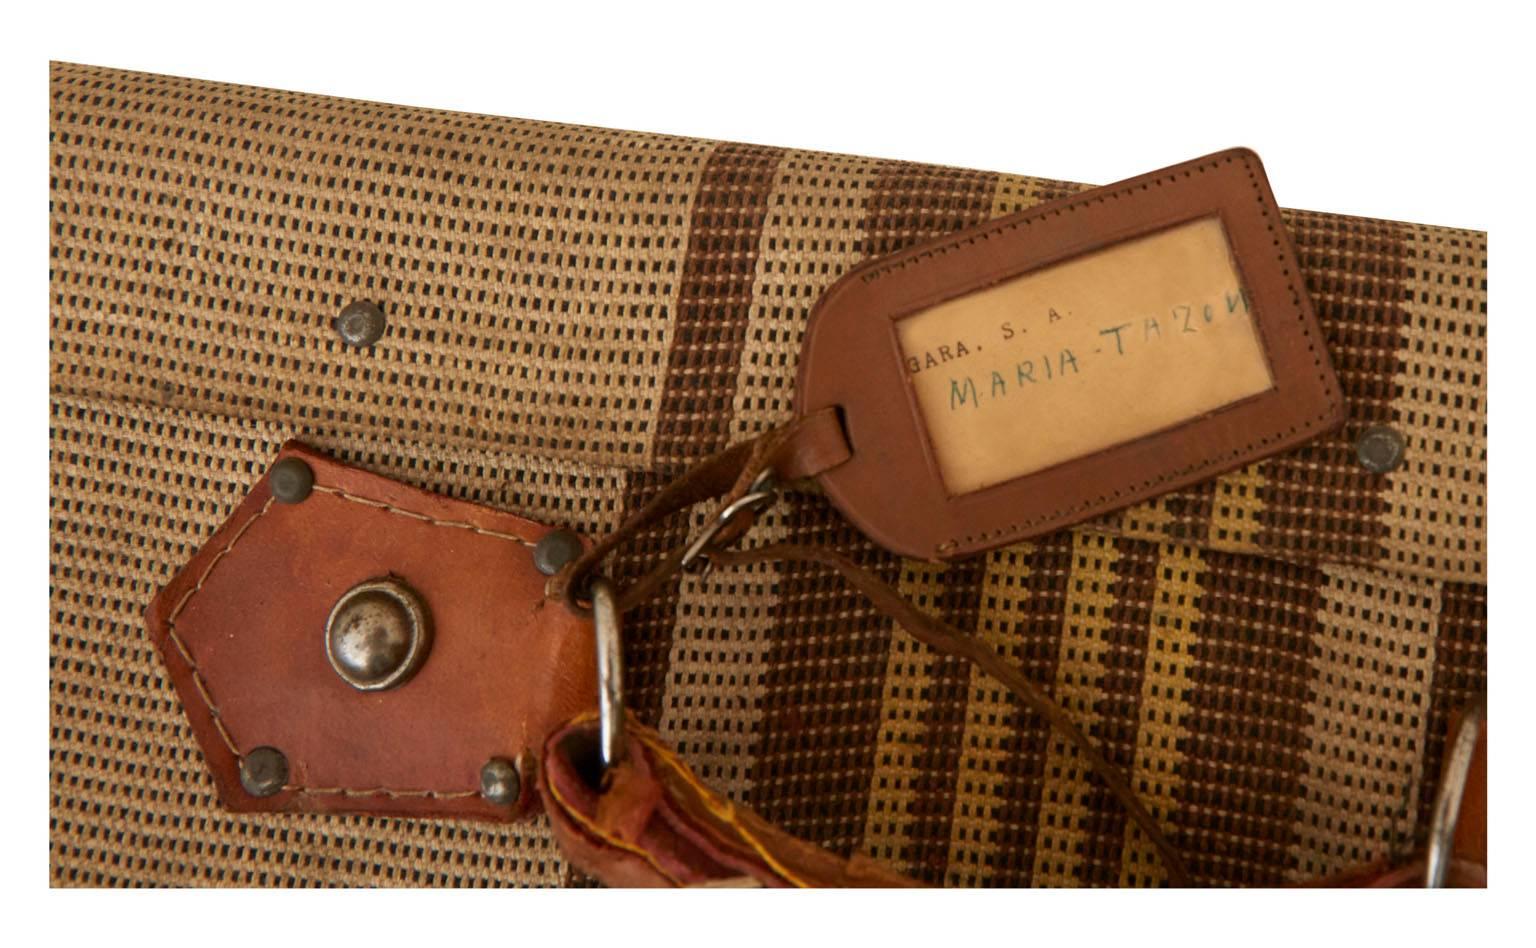 •Tweed wrapping
•Leather corners
•20th century
•Spain

Dimensions:
8.5